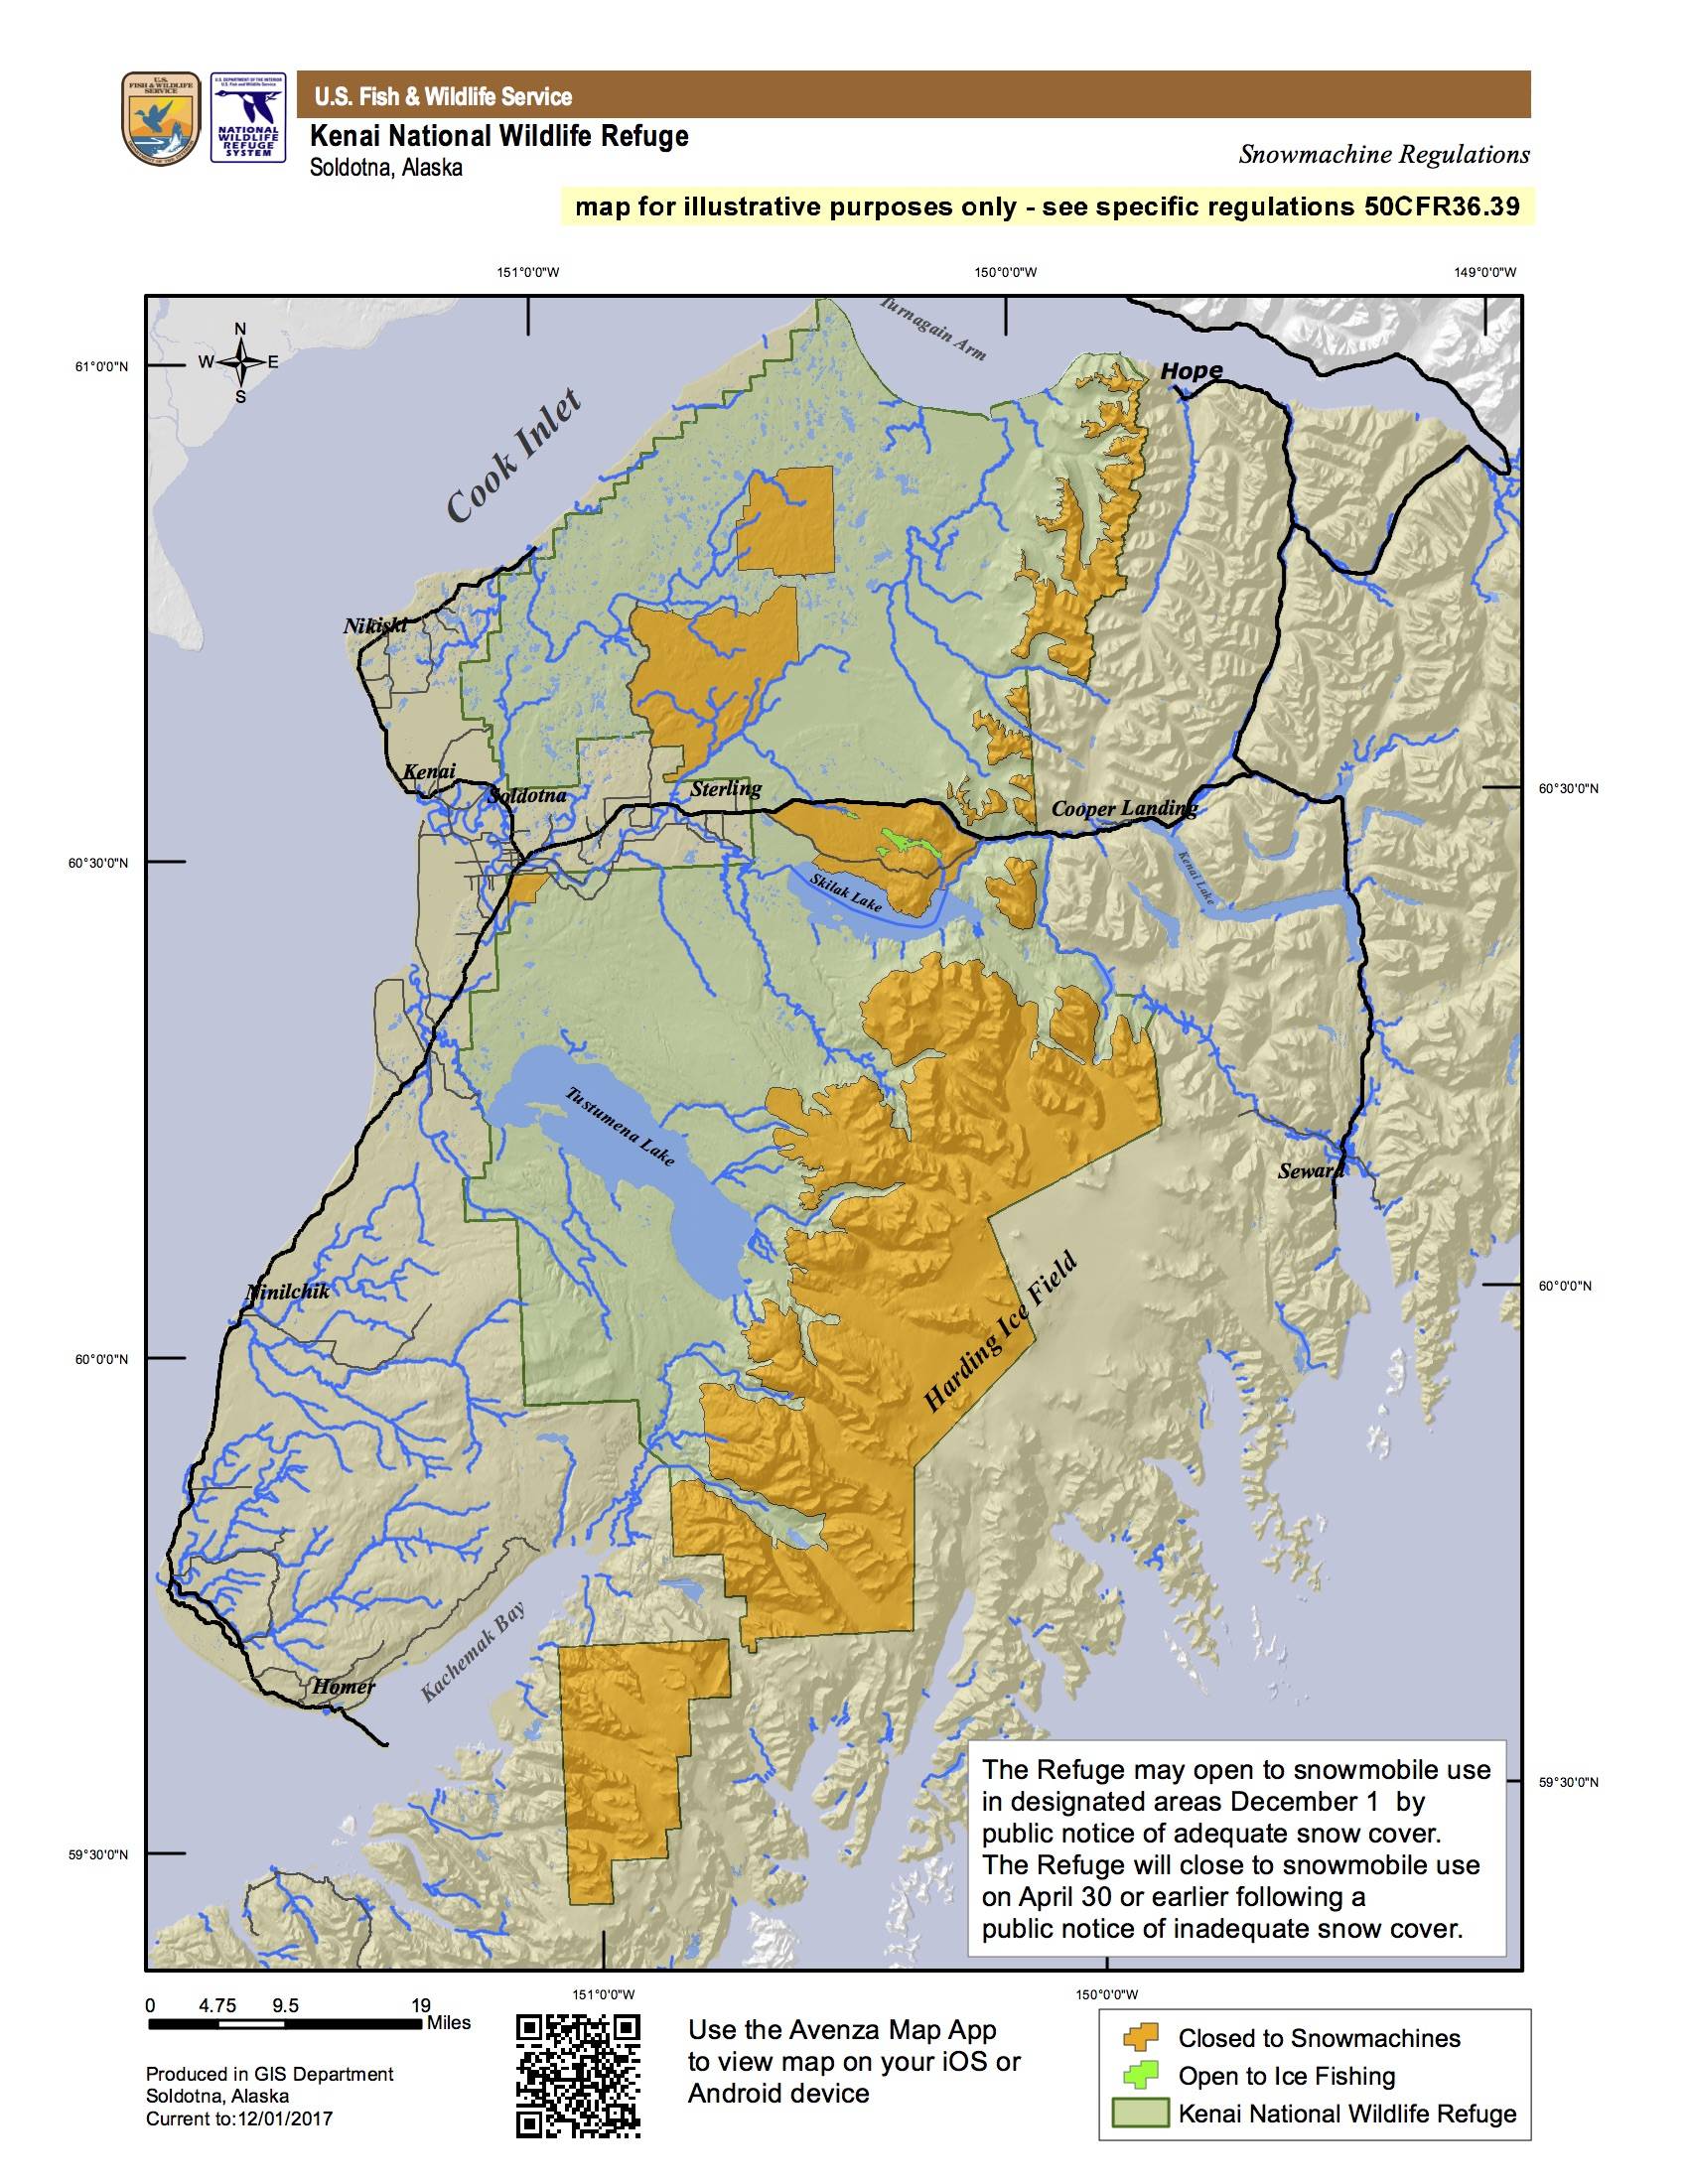 Map showing areas of the refuge open and closed to snowmachine use. (Courtesy of the Kenai National Wildlife Refuge)